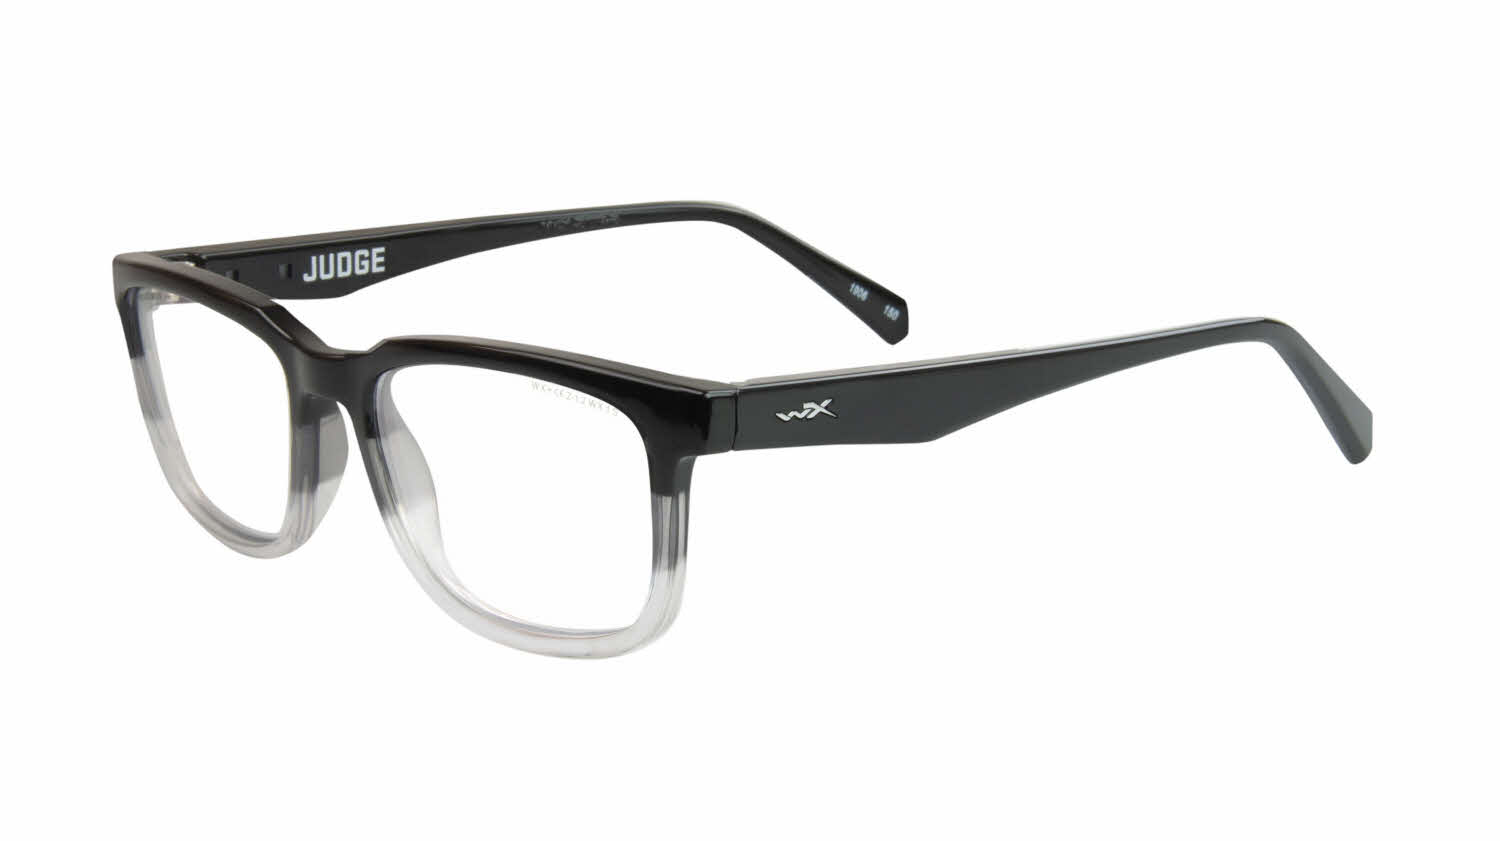 Wiley X WorkSight WX Judge with Side Shields Eyeglasses